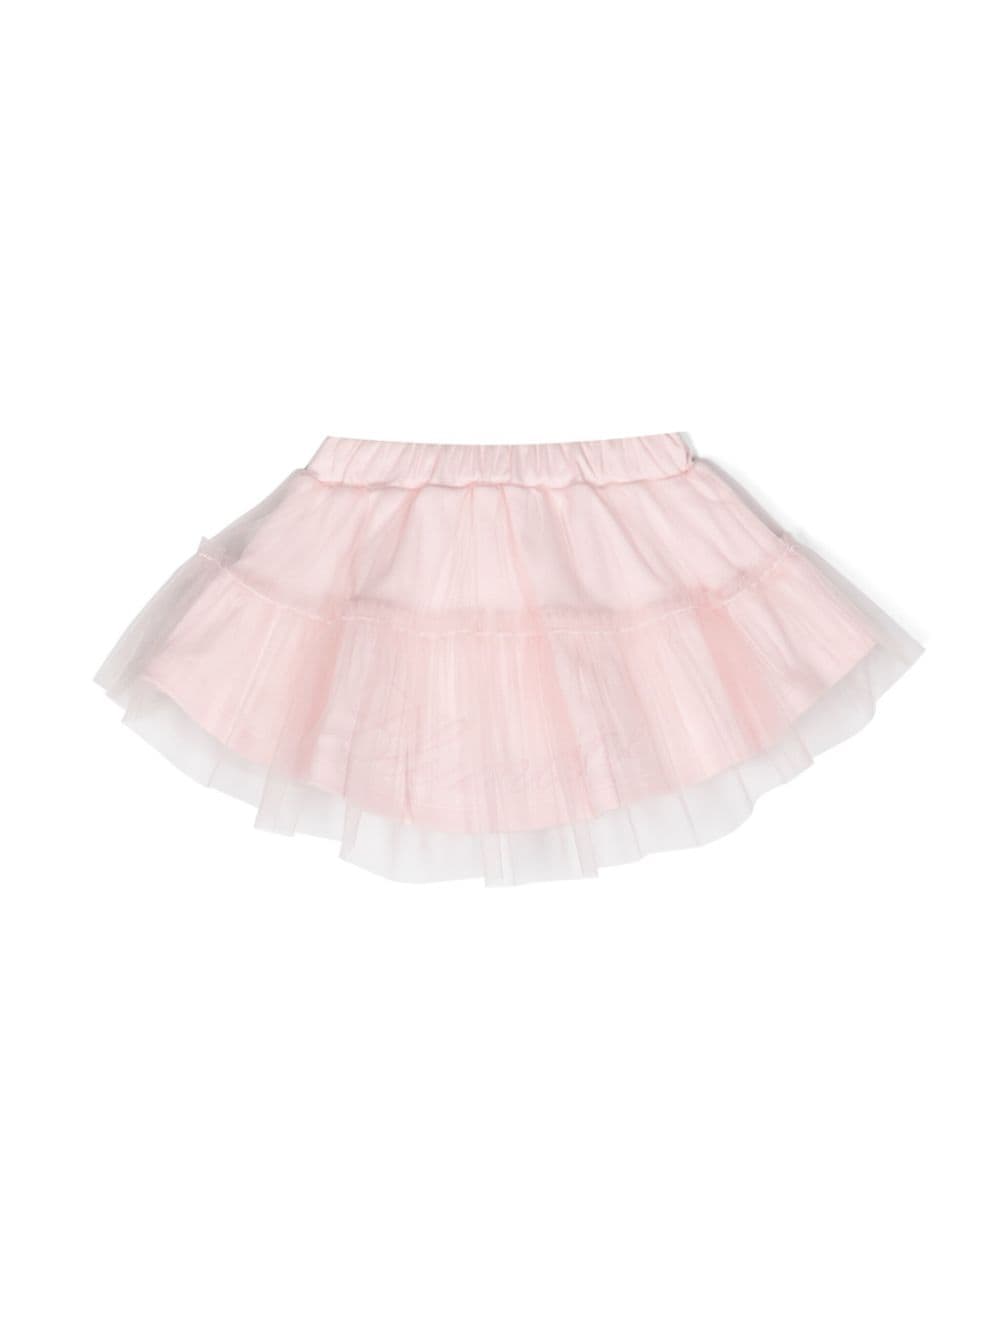 Skirt with tulle layer